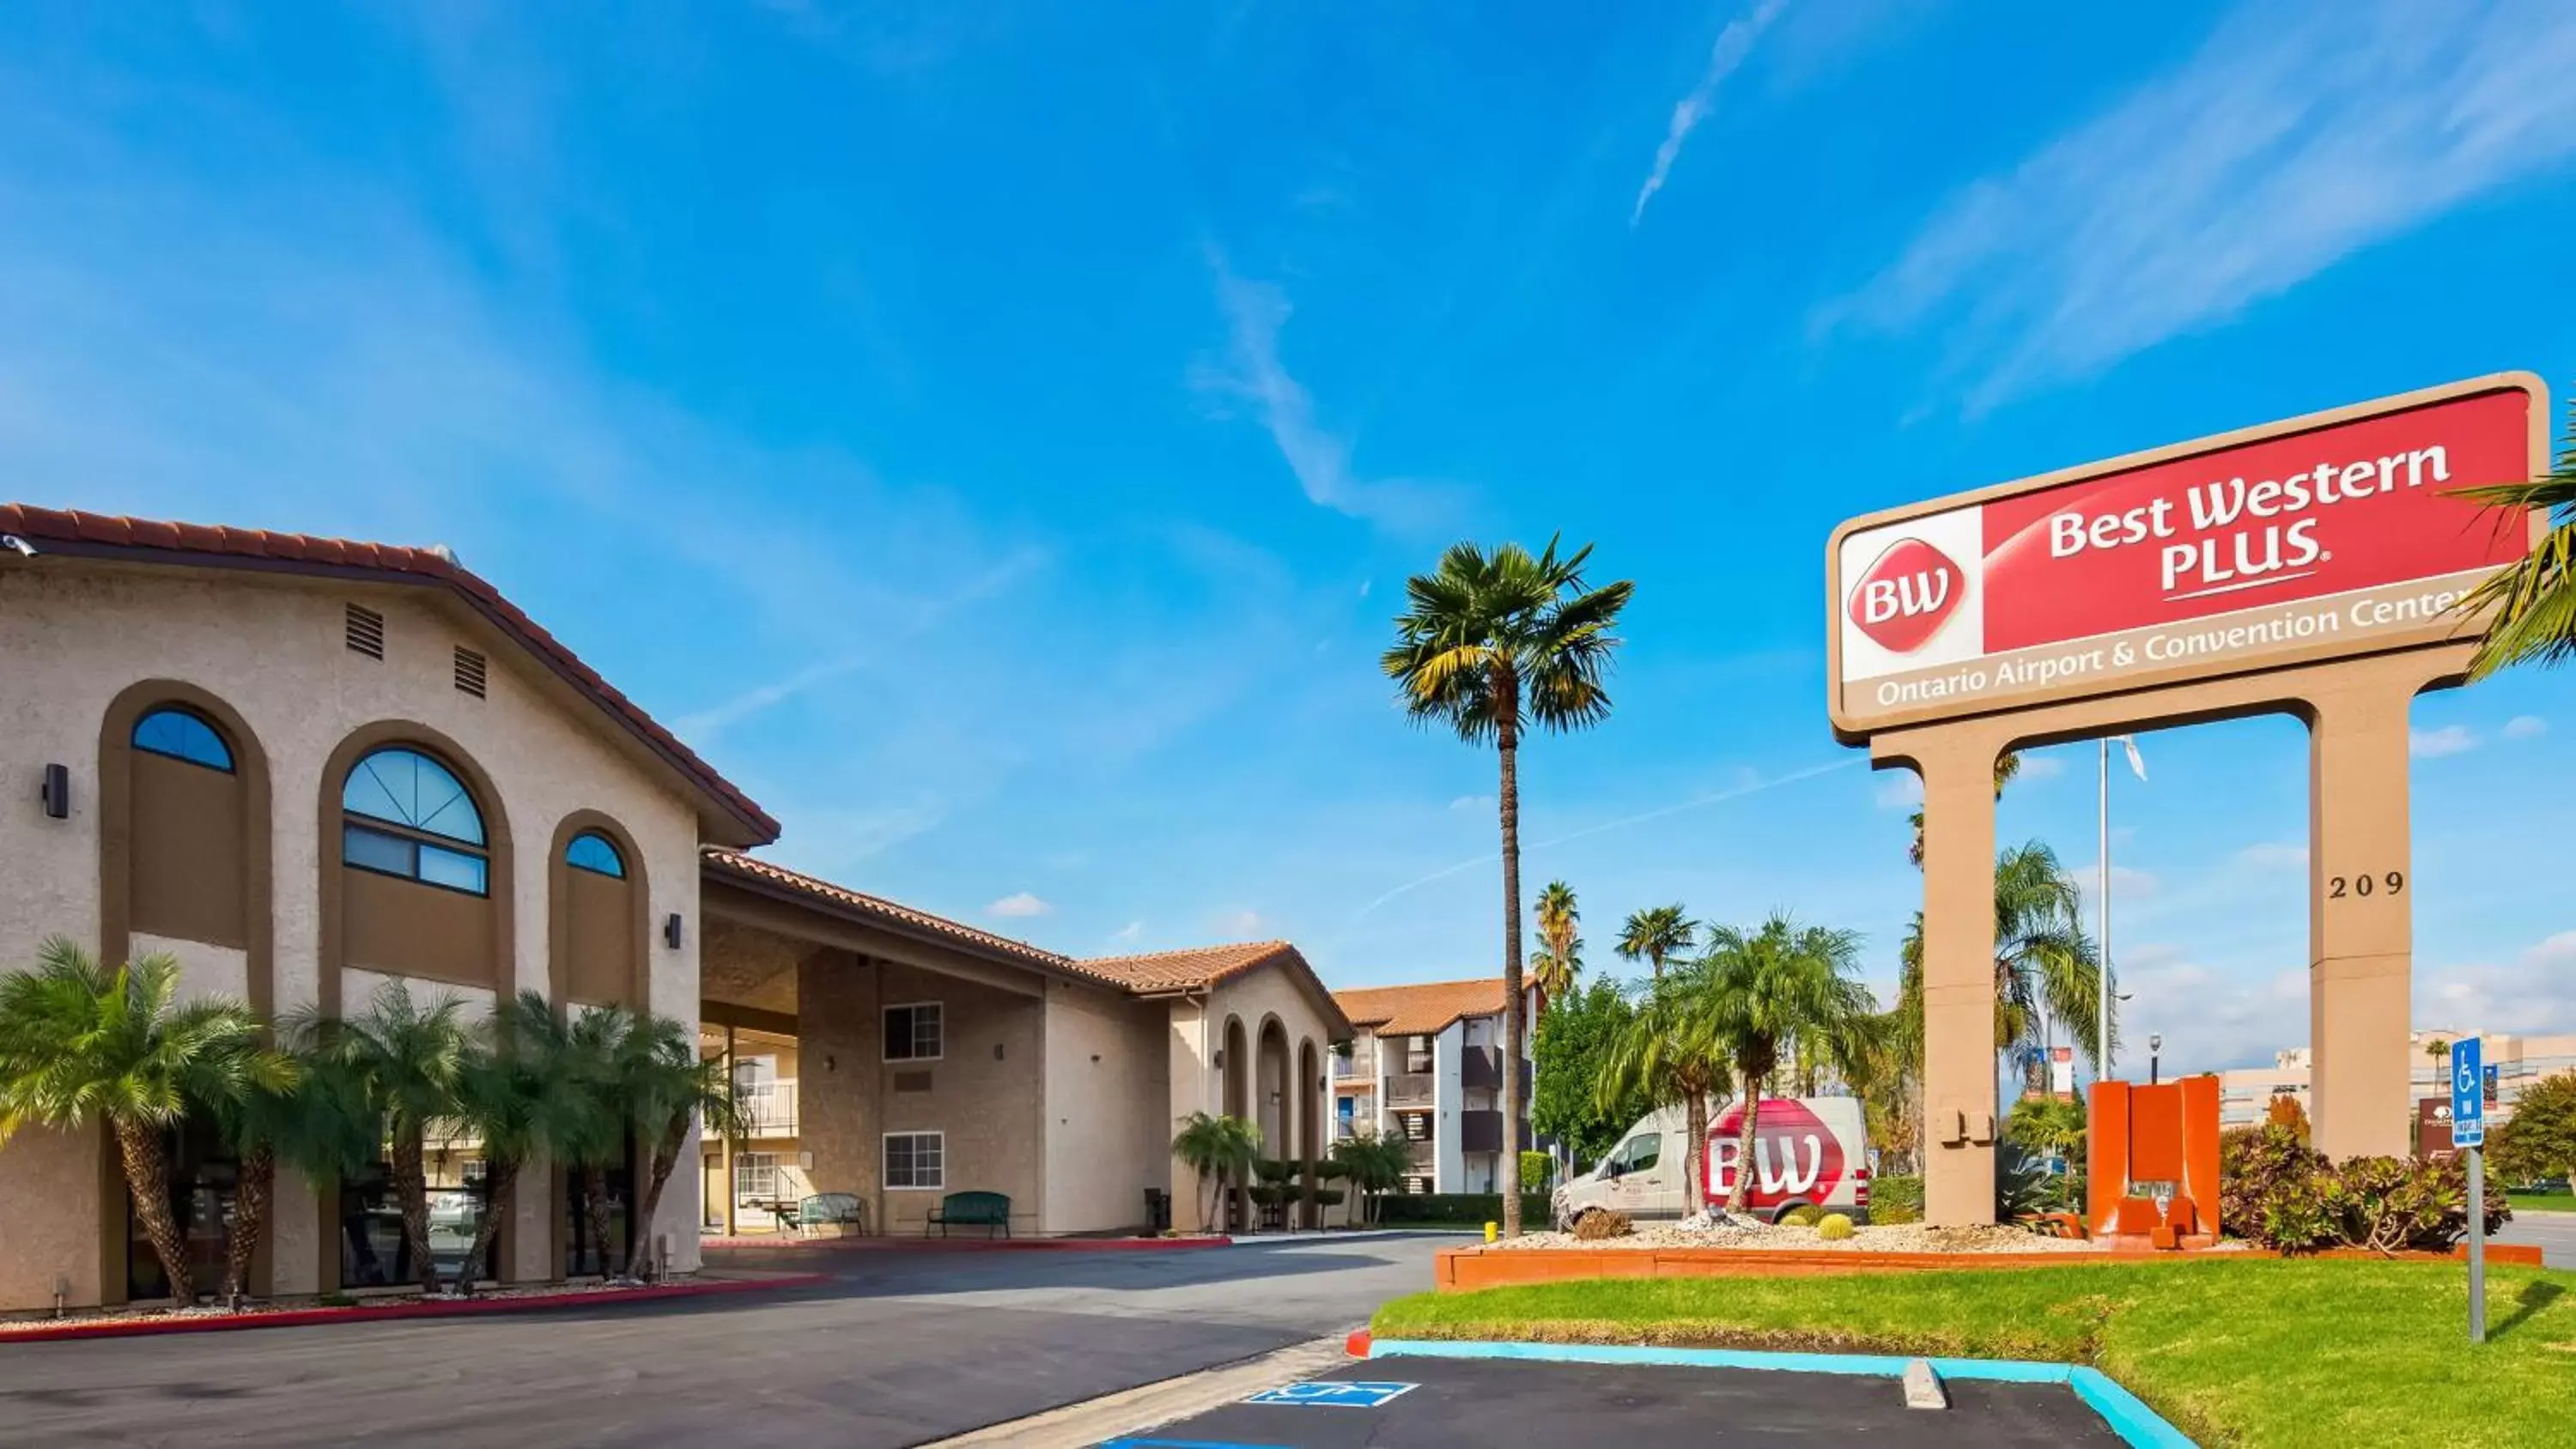 Property building in Best Western Plus Ontario Airport & Convention Center